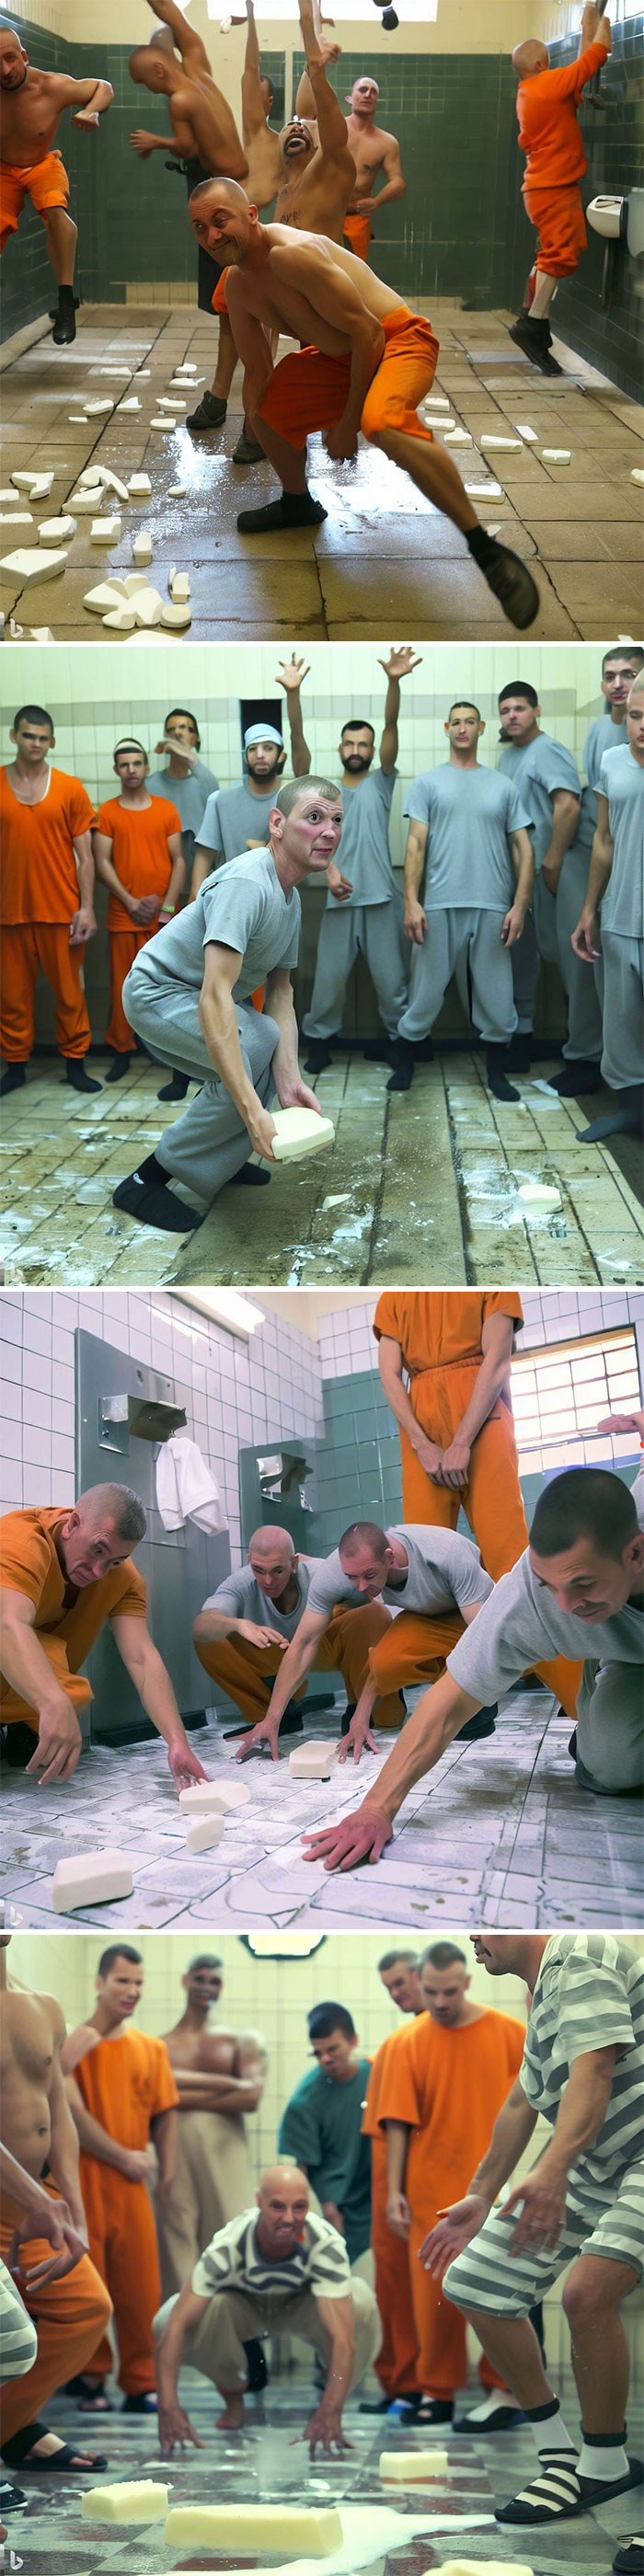 Extreme Prisoner Soap Dropping Competition